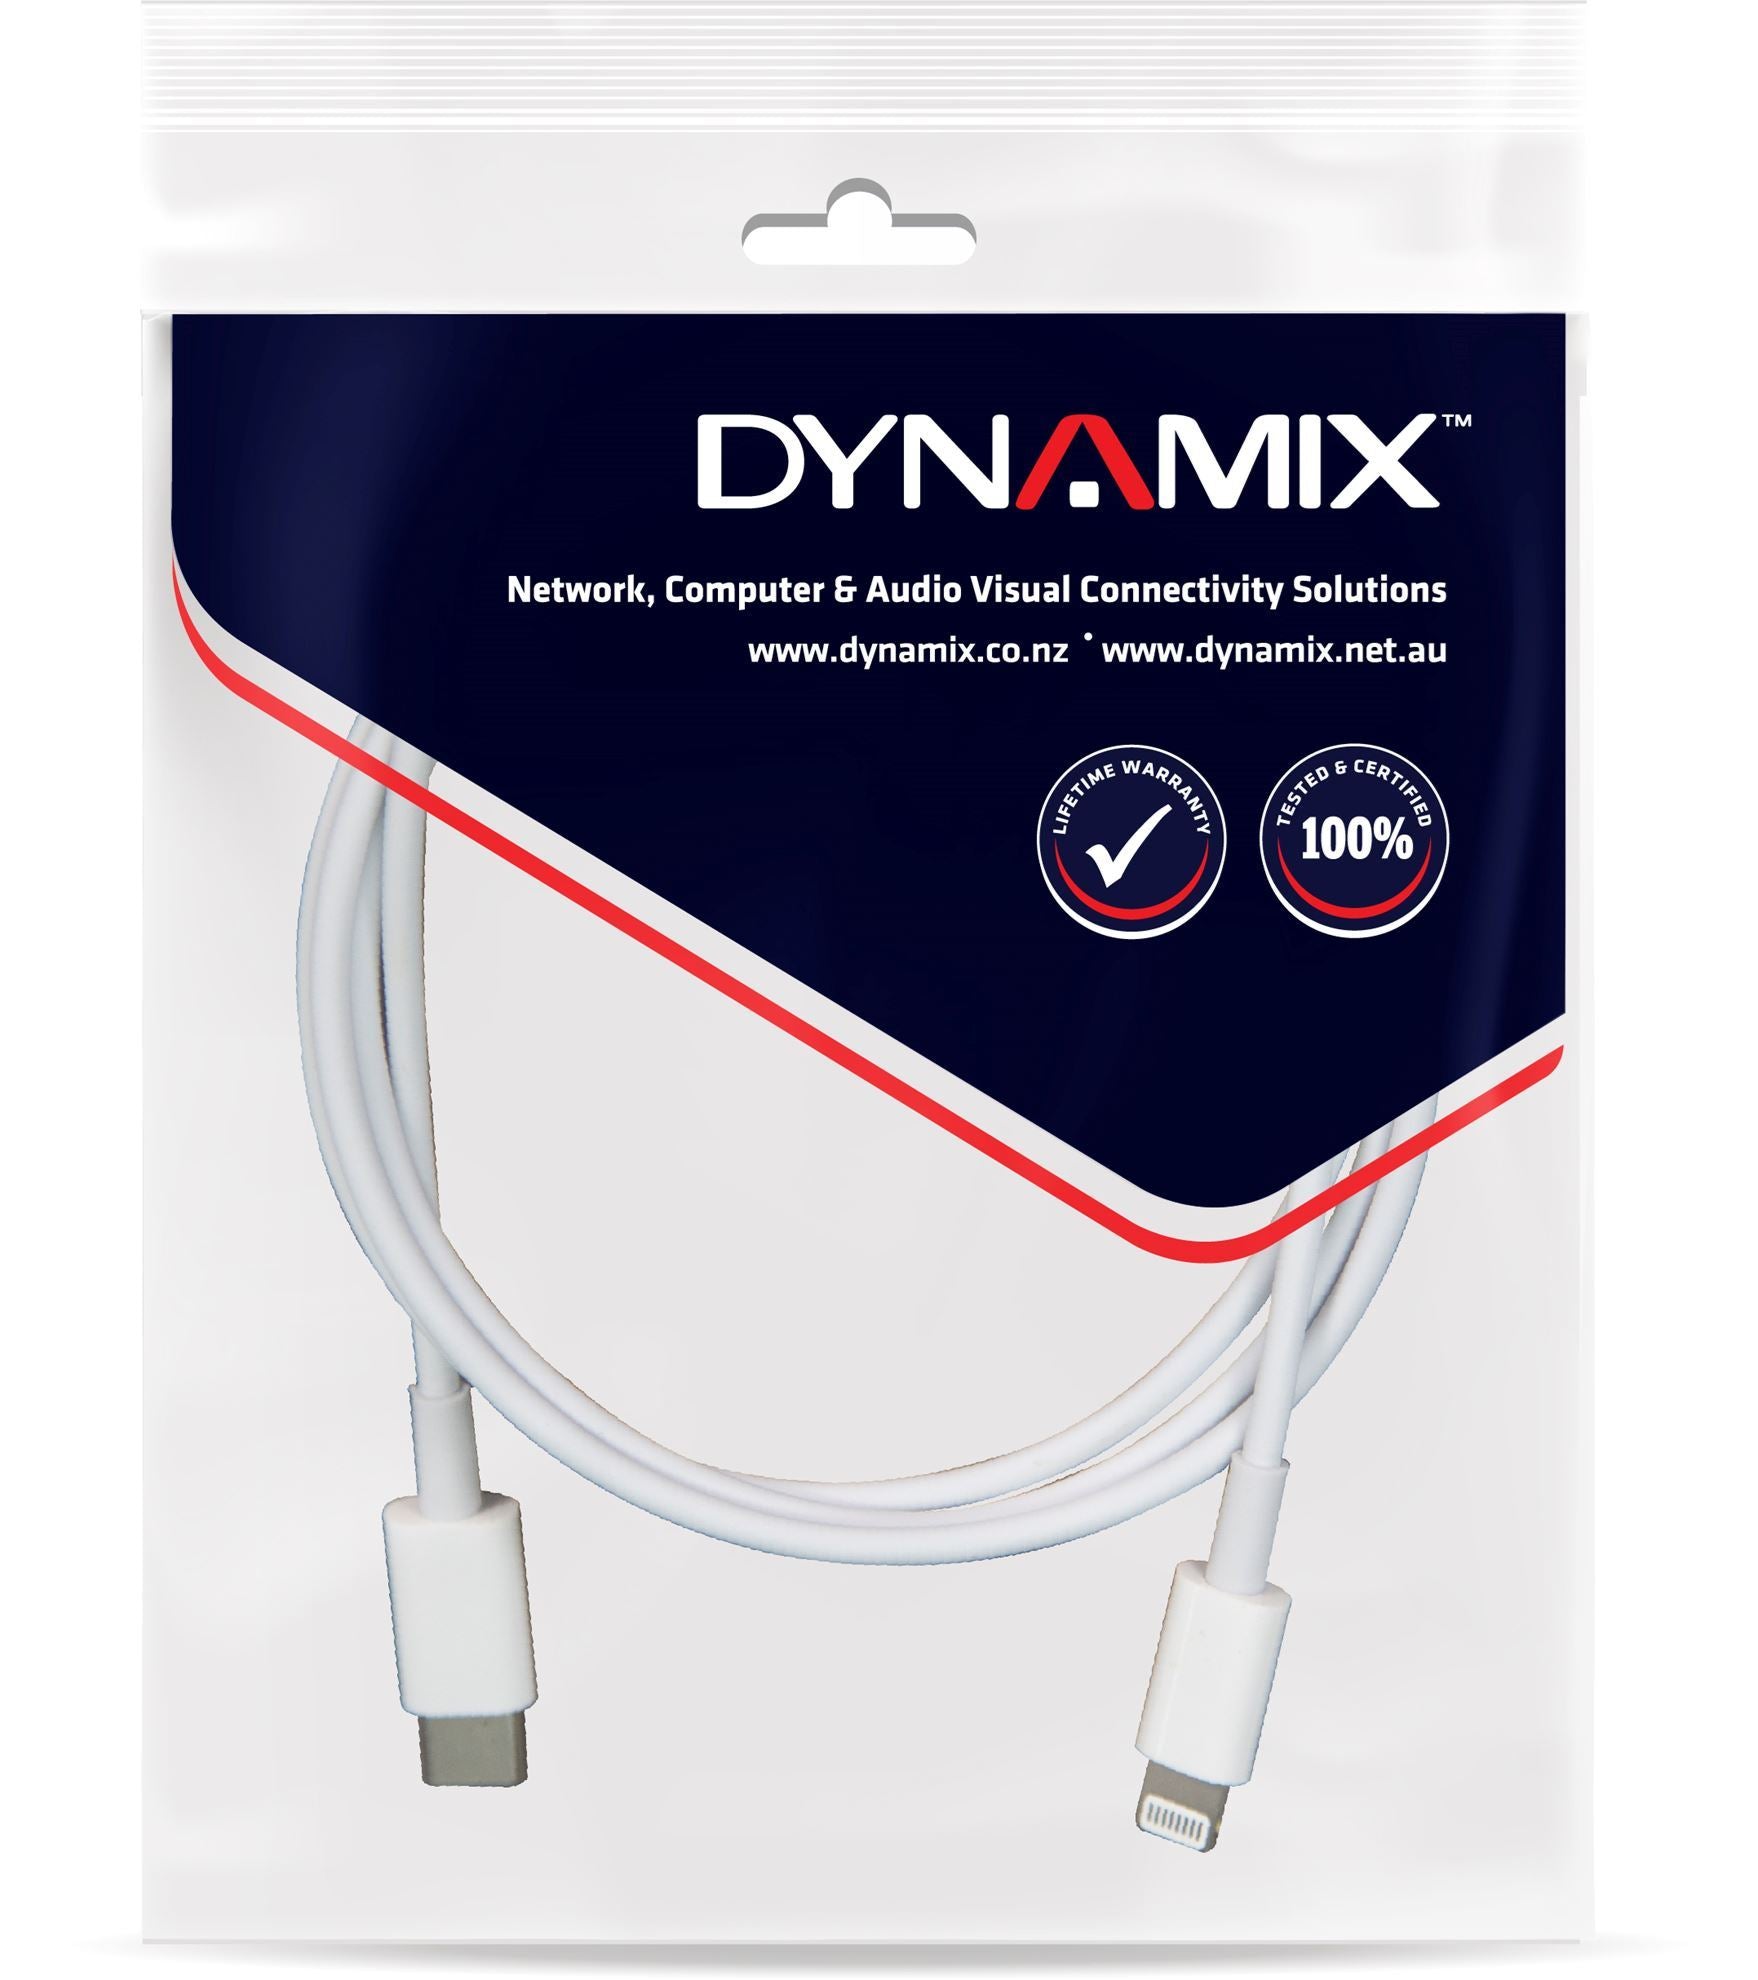 DYNAMIX_2m_USB-C_to_Lightning_Charge_&_Sync_Cable._For_Apple_iPhone,_iPad,_iPad_mini_&_iPods_*Not_MFI_Certified* 937